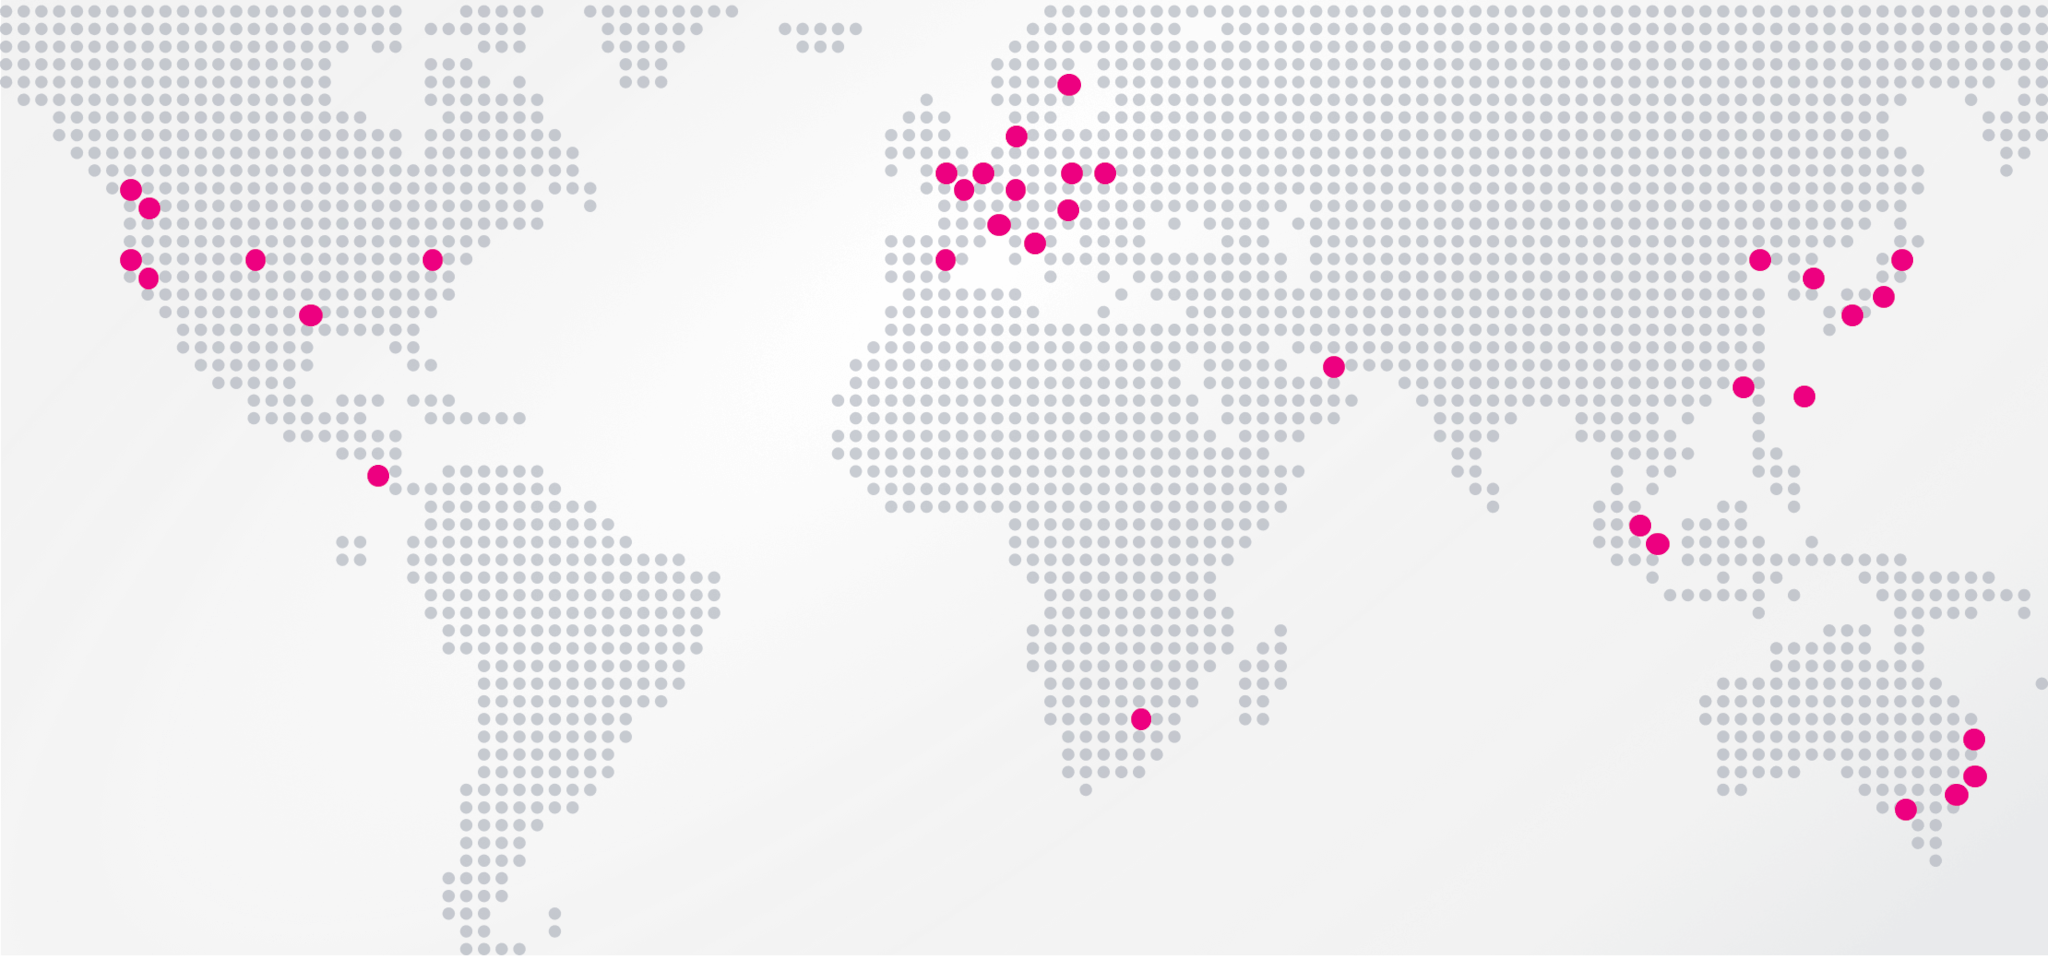 A map shows Splunk offics around the world with over 30 global locations highlighted with red dots in North America, Europe, the Middle East, Africa, Asia and Australia.